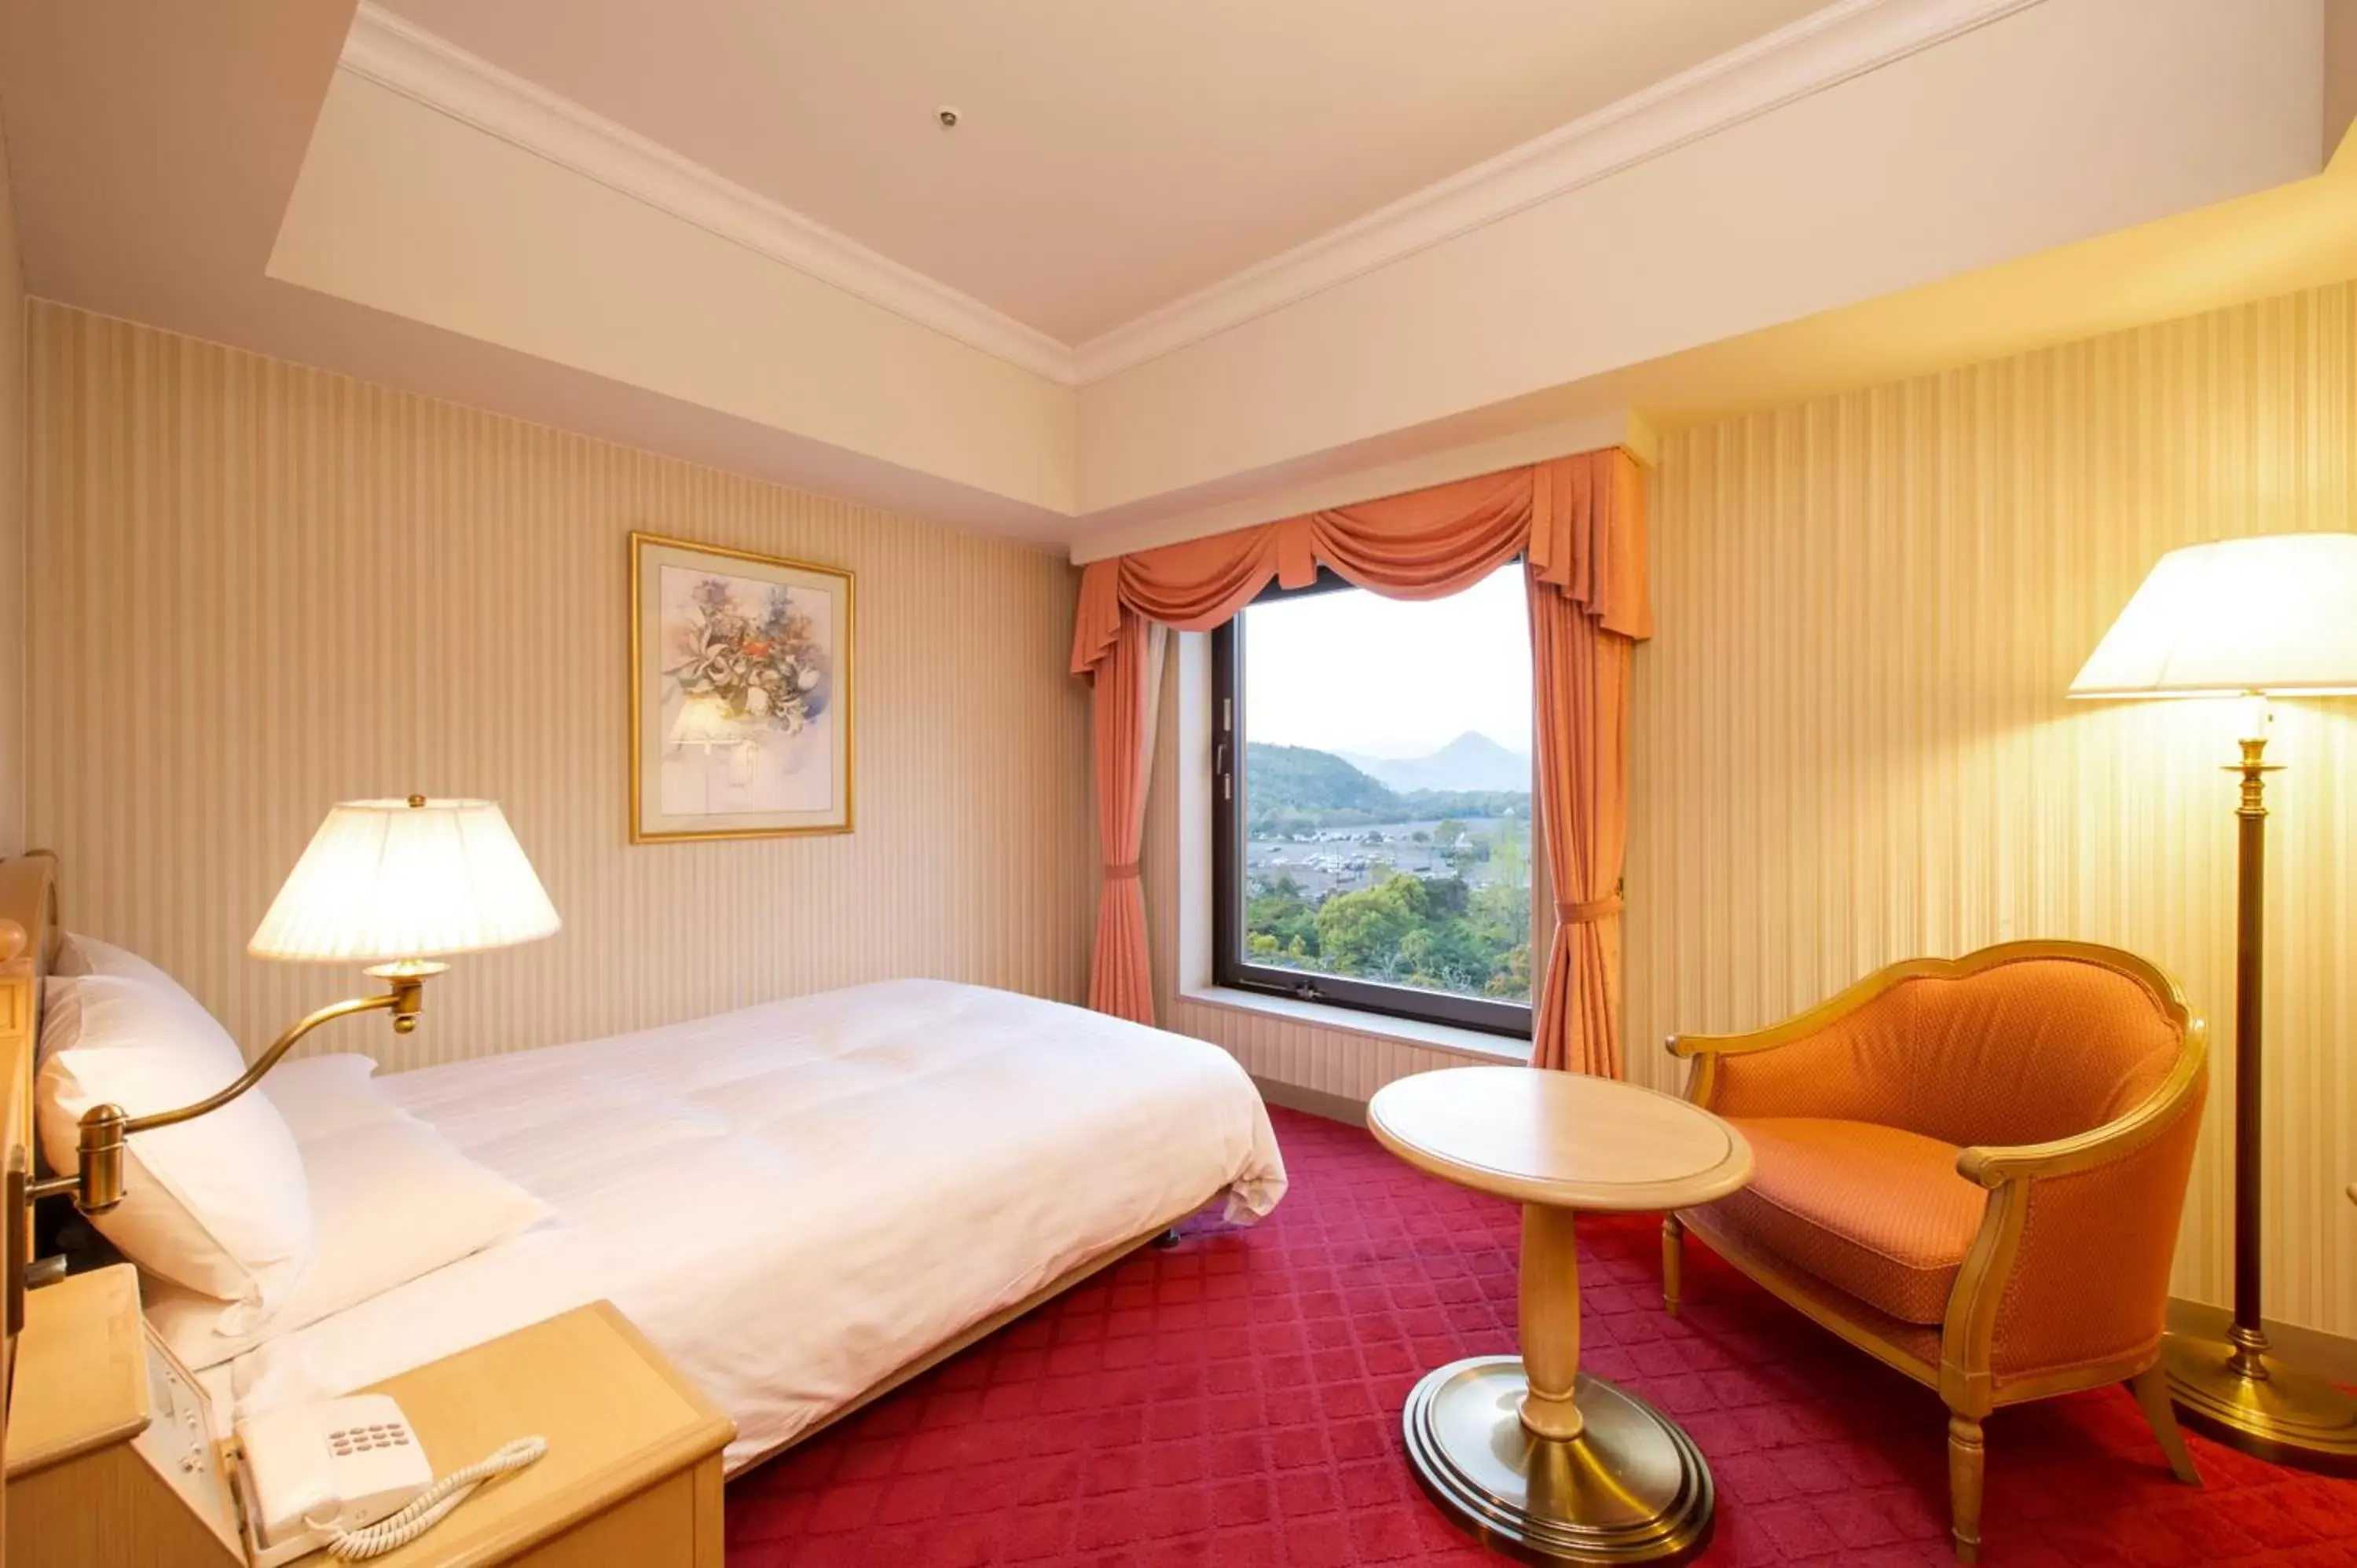 Double Room with Small Double Bed and Station View - single occupancy in Hotel Okura JR Huis Ten Bosch